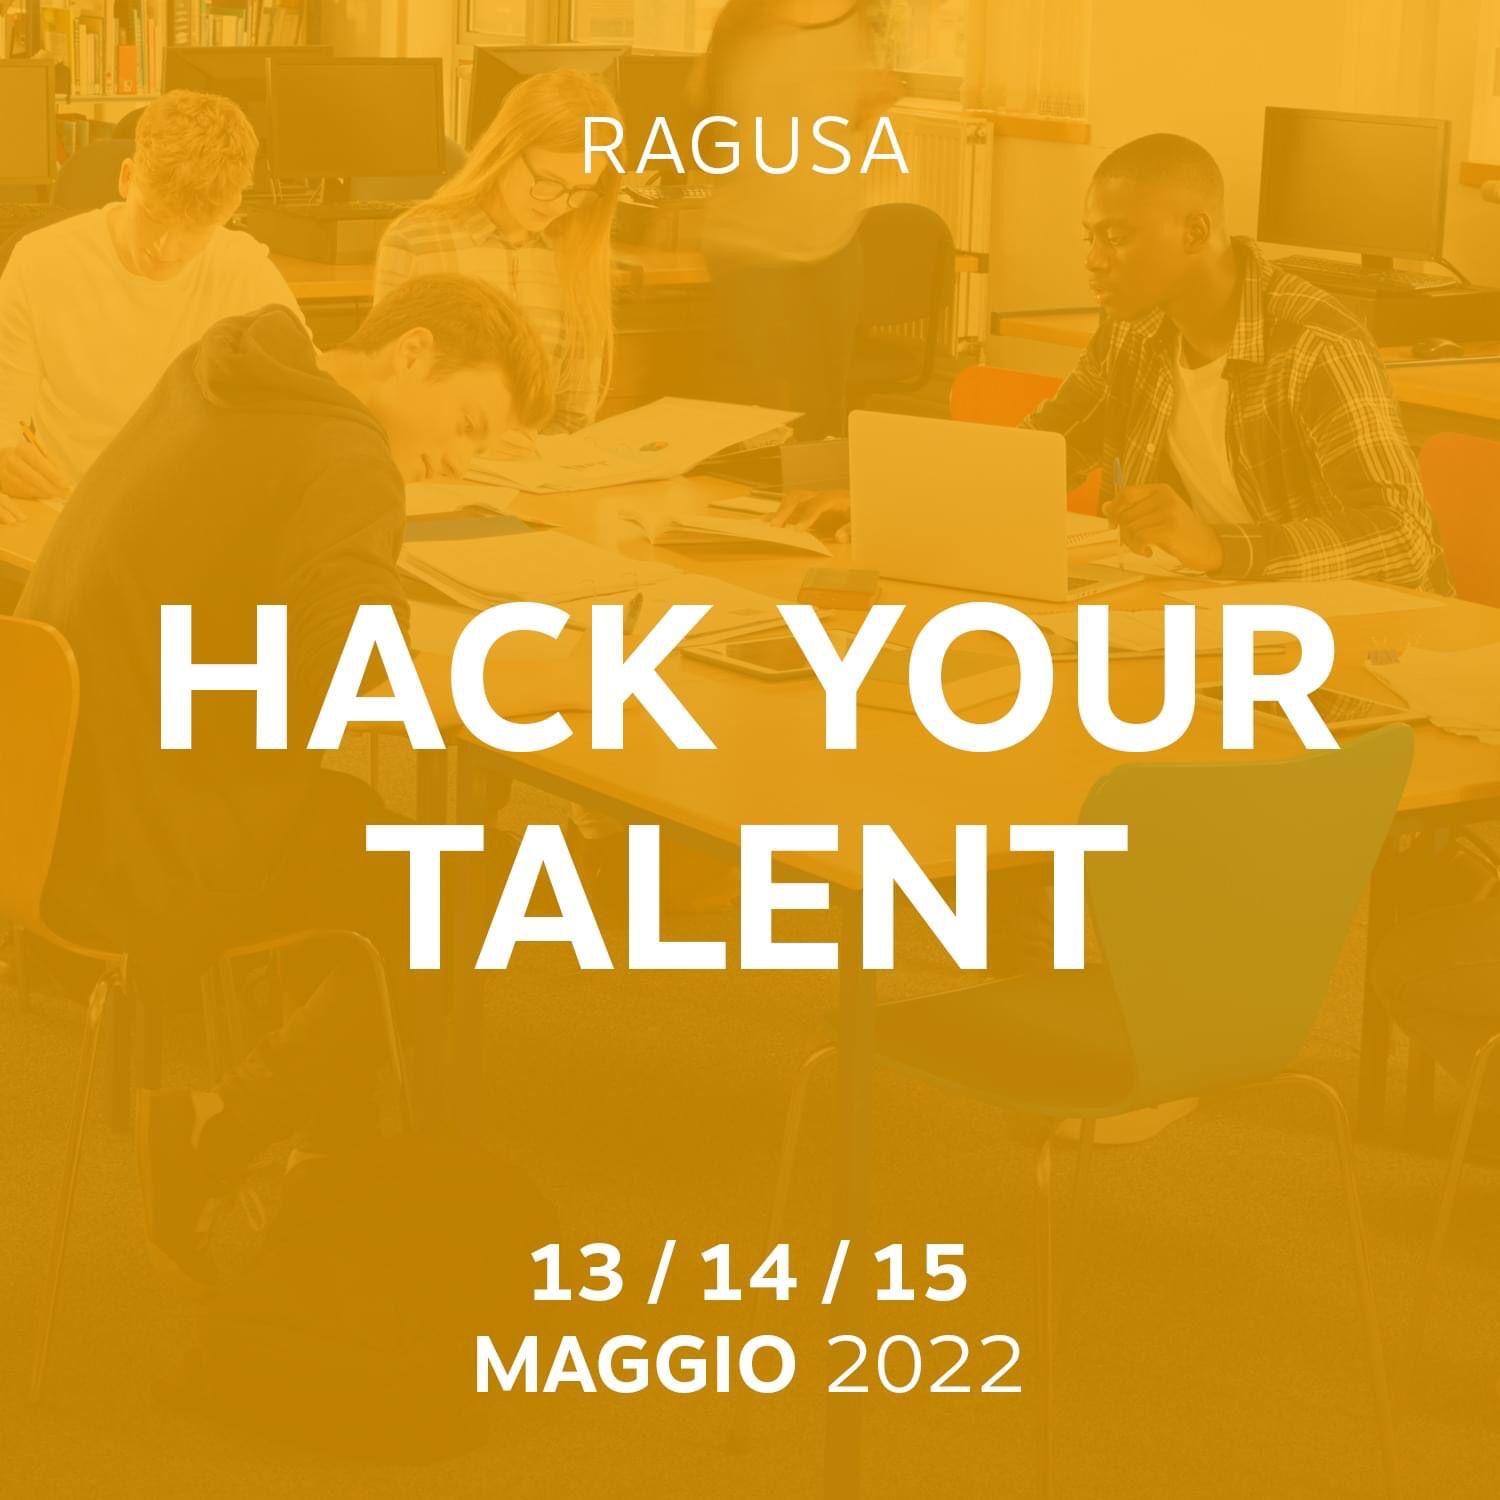 Hack-Your-talent-Ragusa